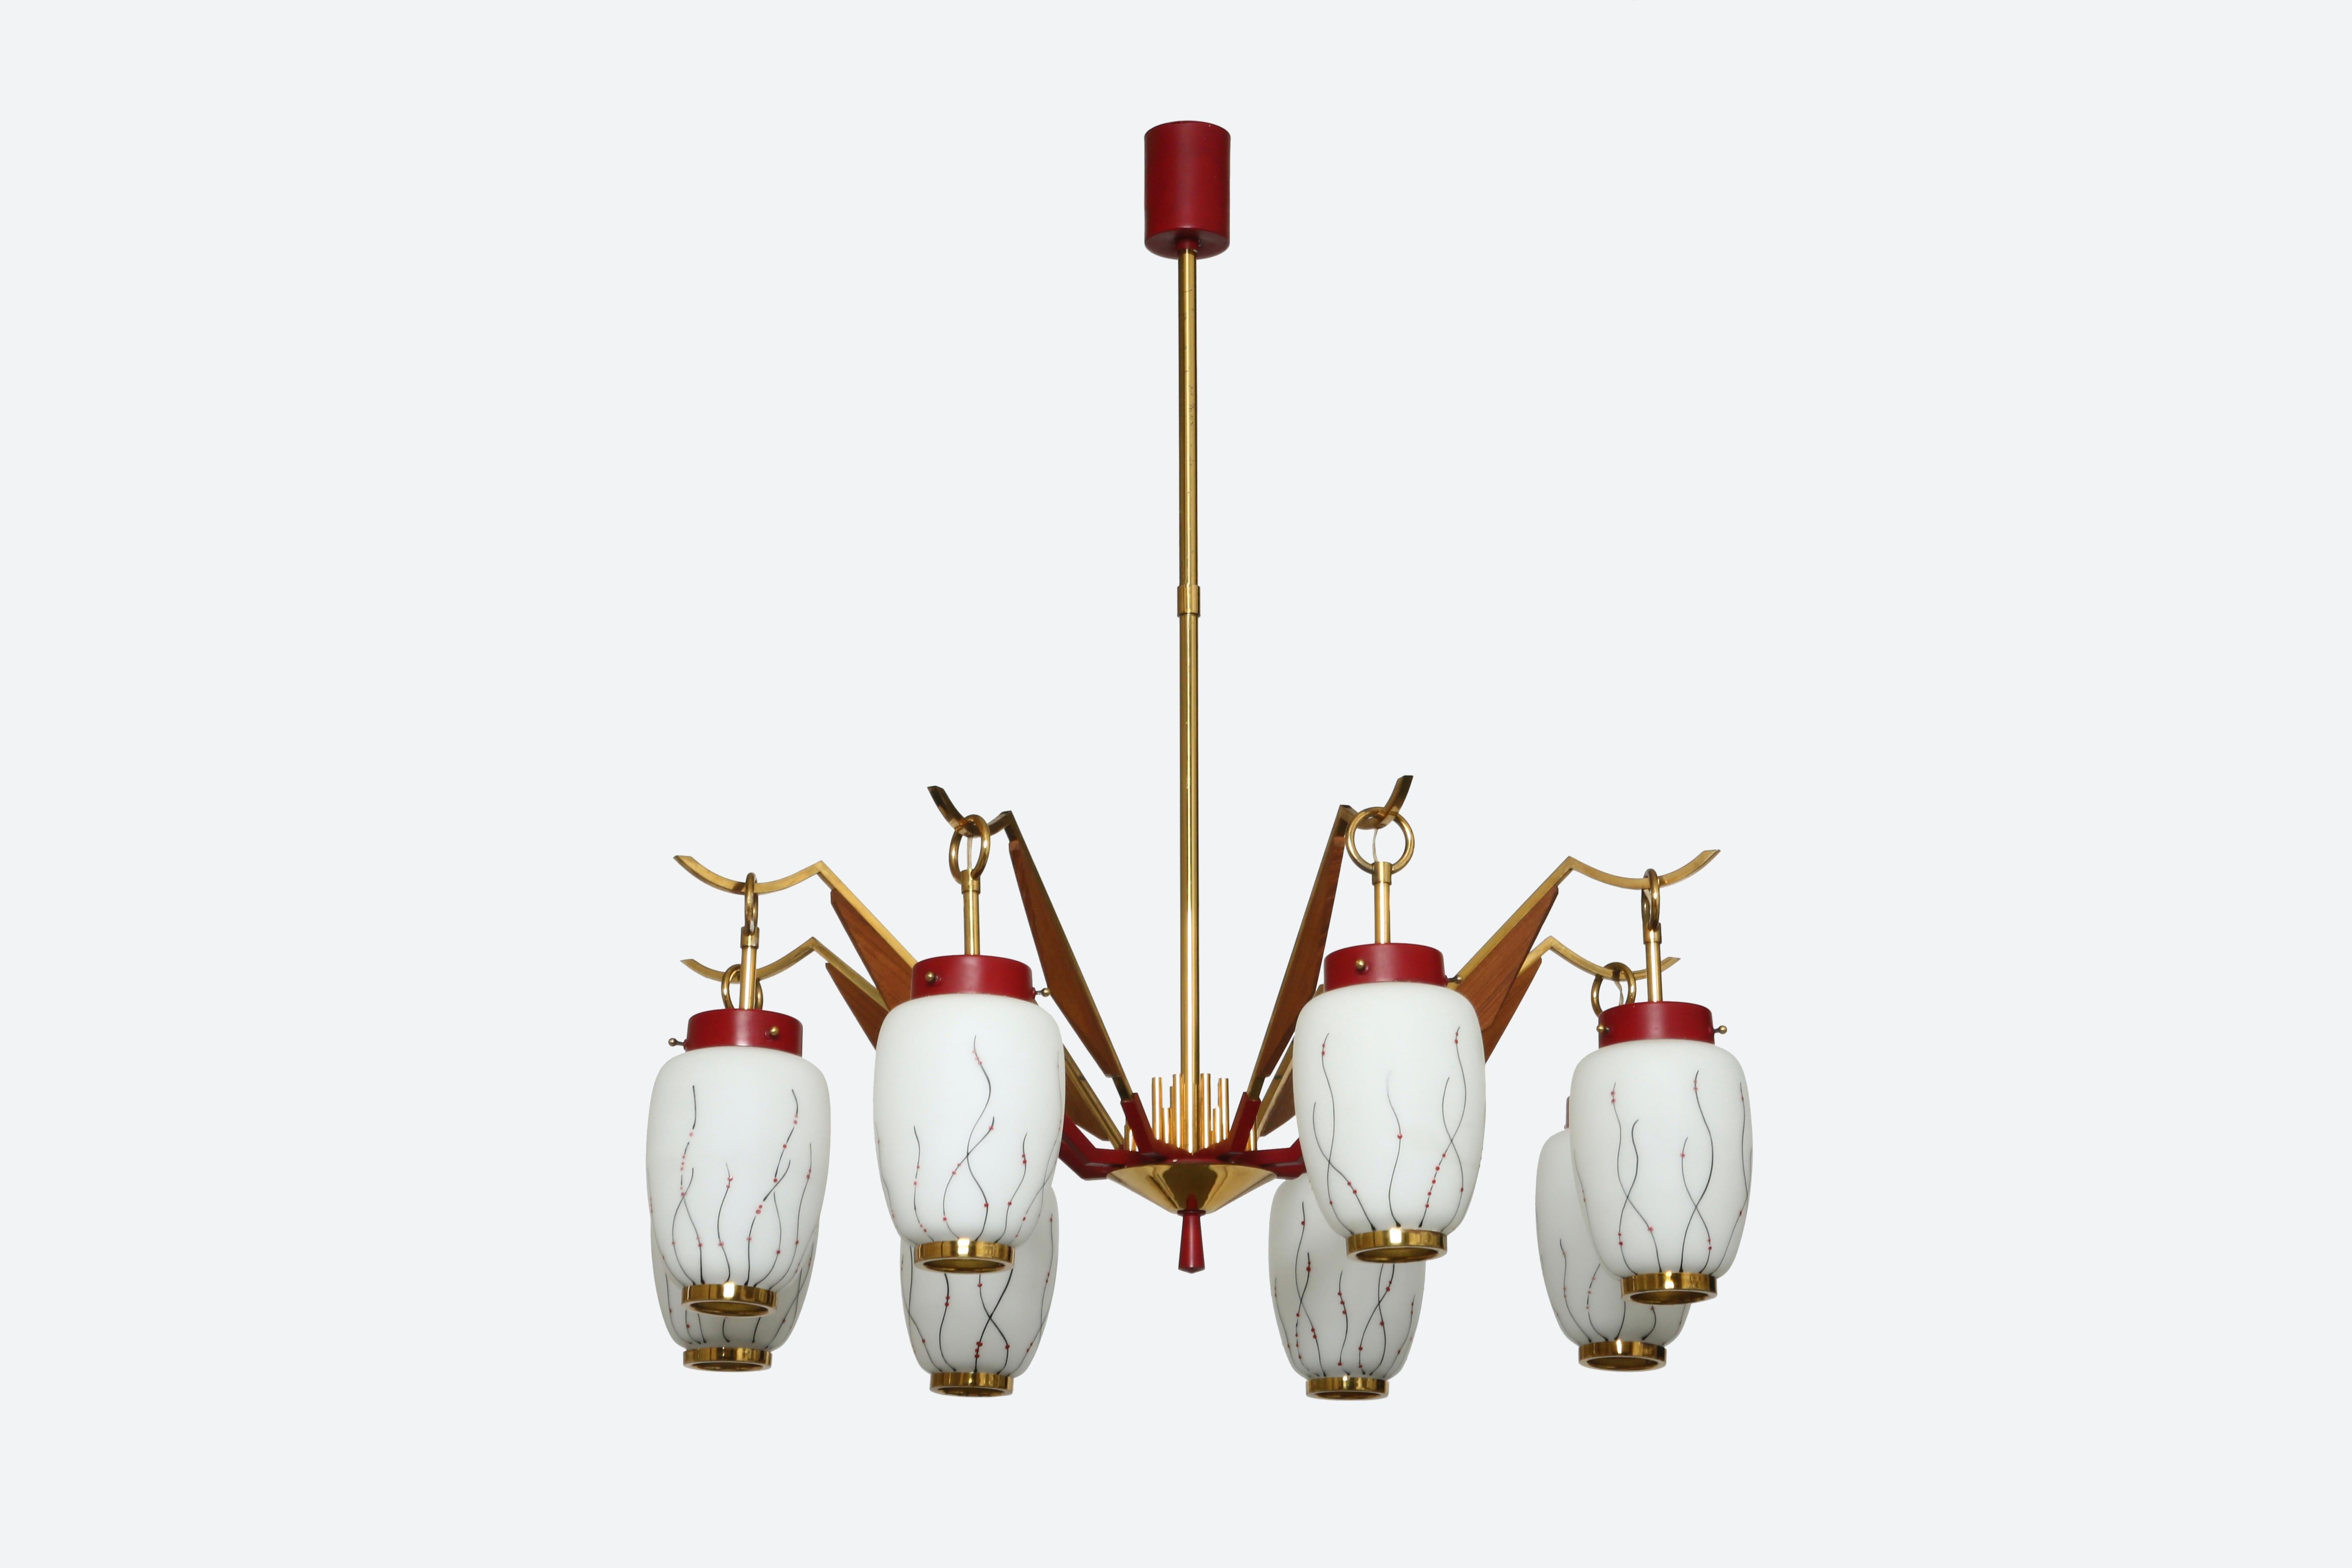 Stilnovo style chandelier with eight arms.
Designed and made in Italy in 1960s.
Glass bells with floral decoration.
Complimentary US rewiring upon request.

We take pride in bringing vintage fixtures to their full glory again.
At Illustris Lighting